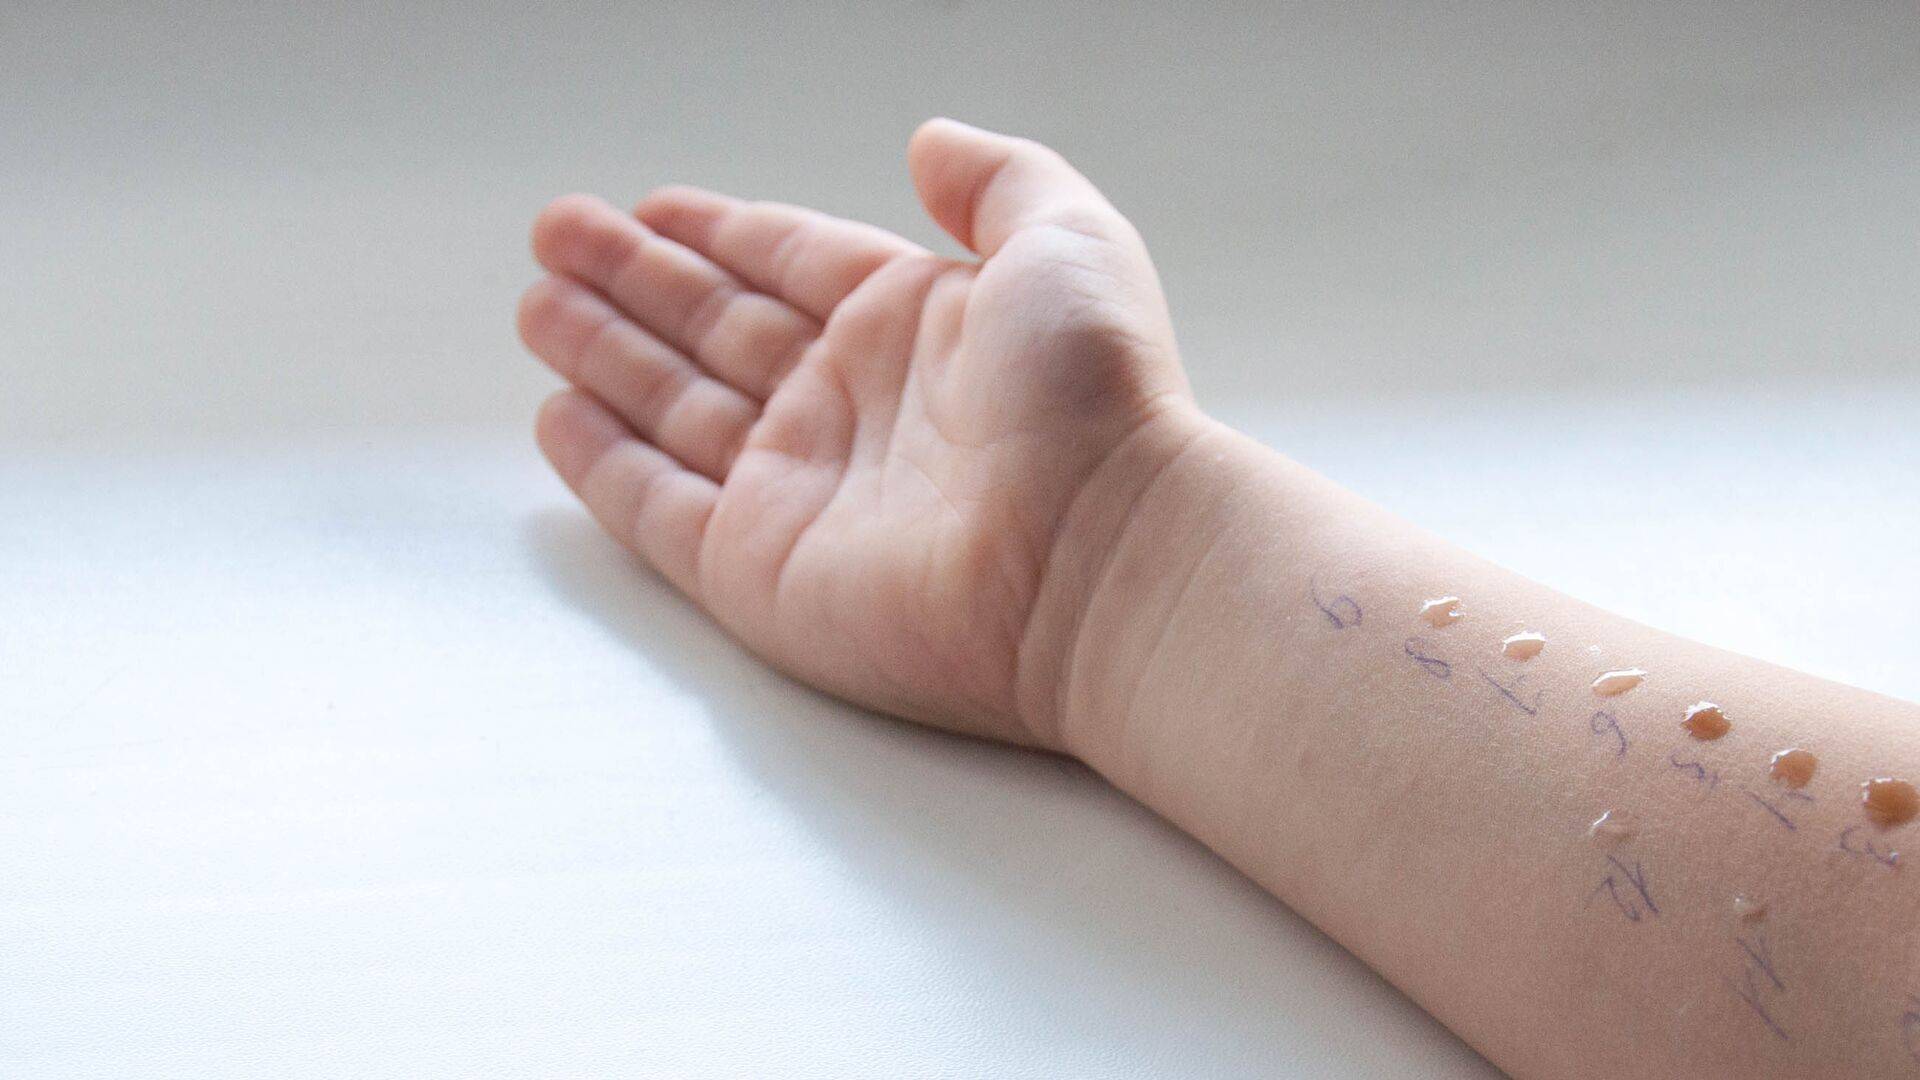 Child’s arm during a skin prick test – liquid drops containing allergens may cause a reaction like a mosquito bite